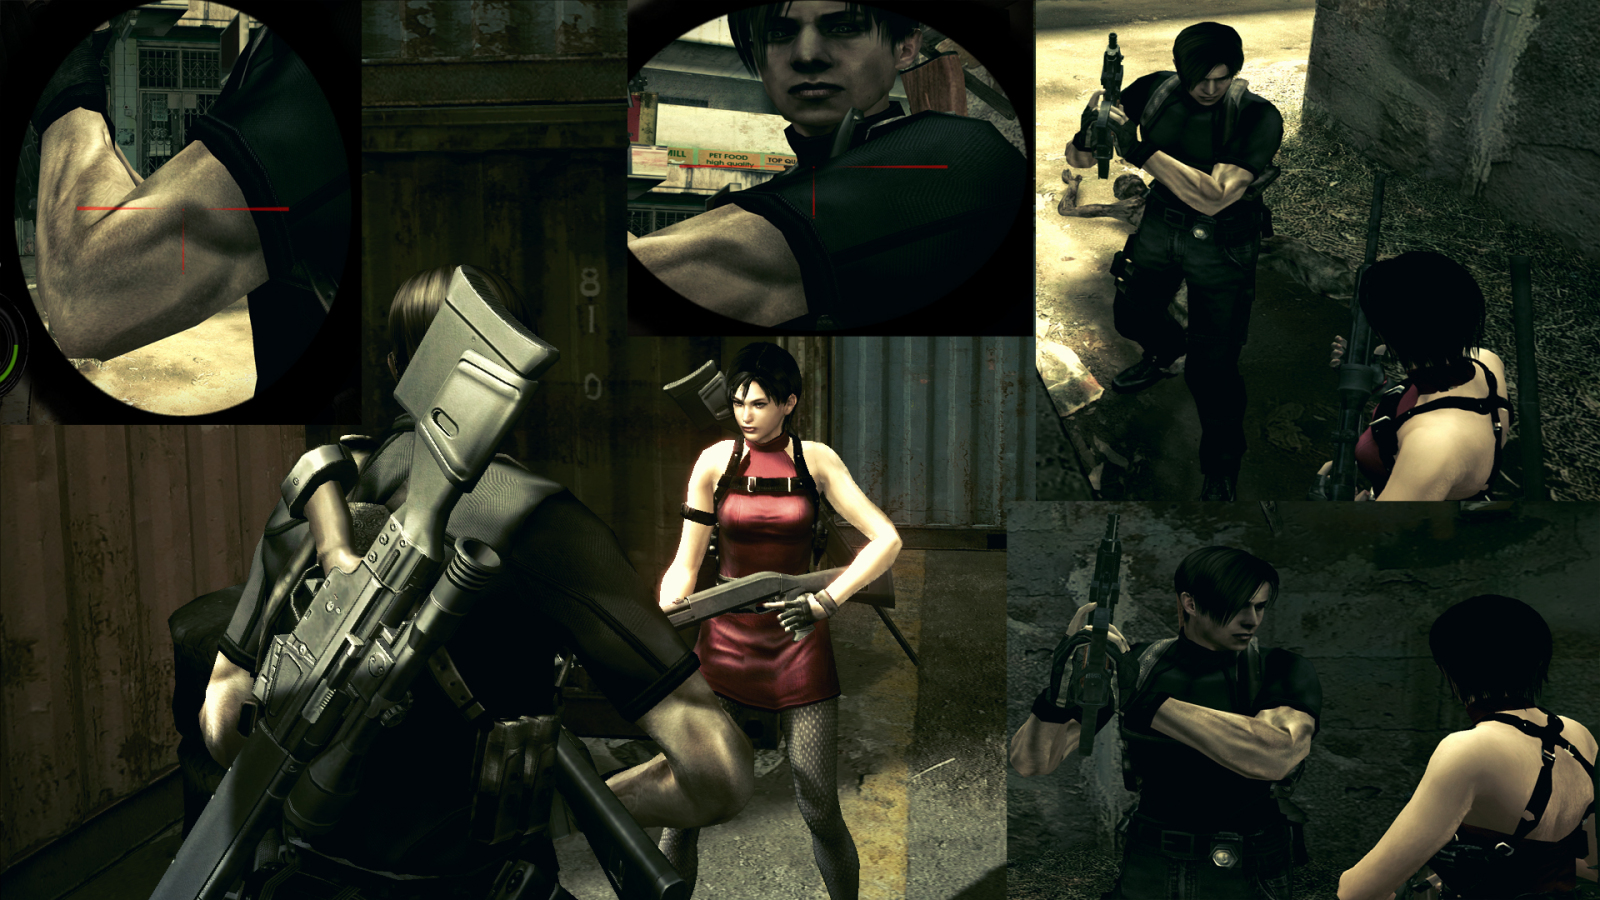 ADA&LEON RE4 BY EVILORD NOW IN HD!